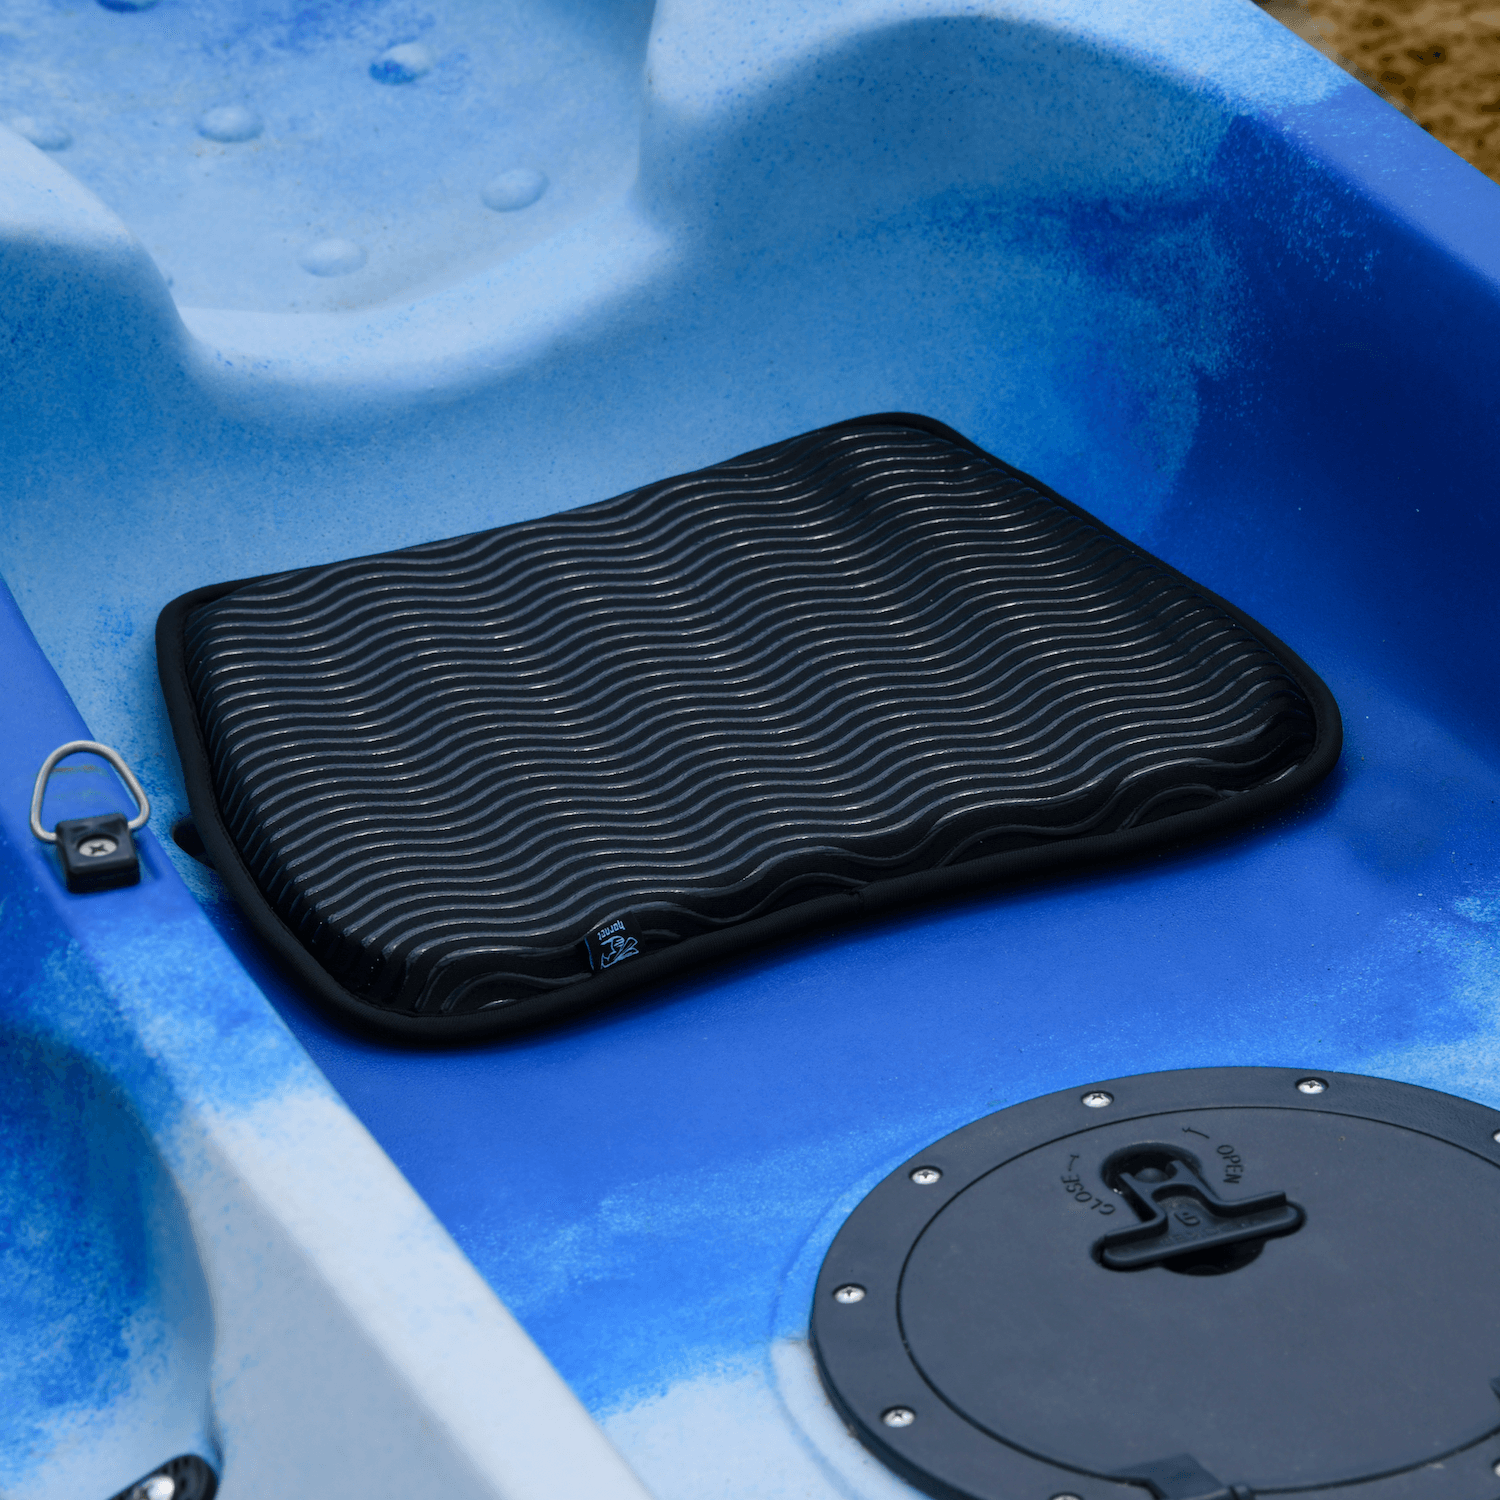 Hornet Watersports Anti Slip Kayak Seat Cushion Ideal Waterproof Seat Pad for Sit in Kayak, Inflatable Kayak, Canoe and Boat. Comfort Accessories for